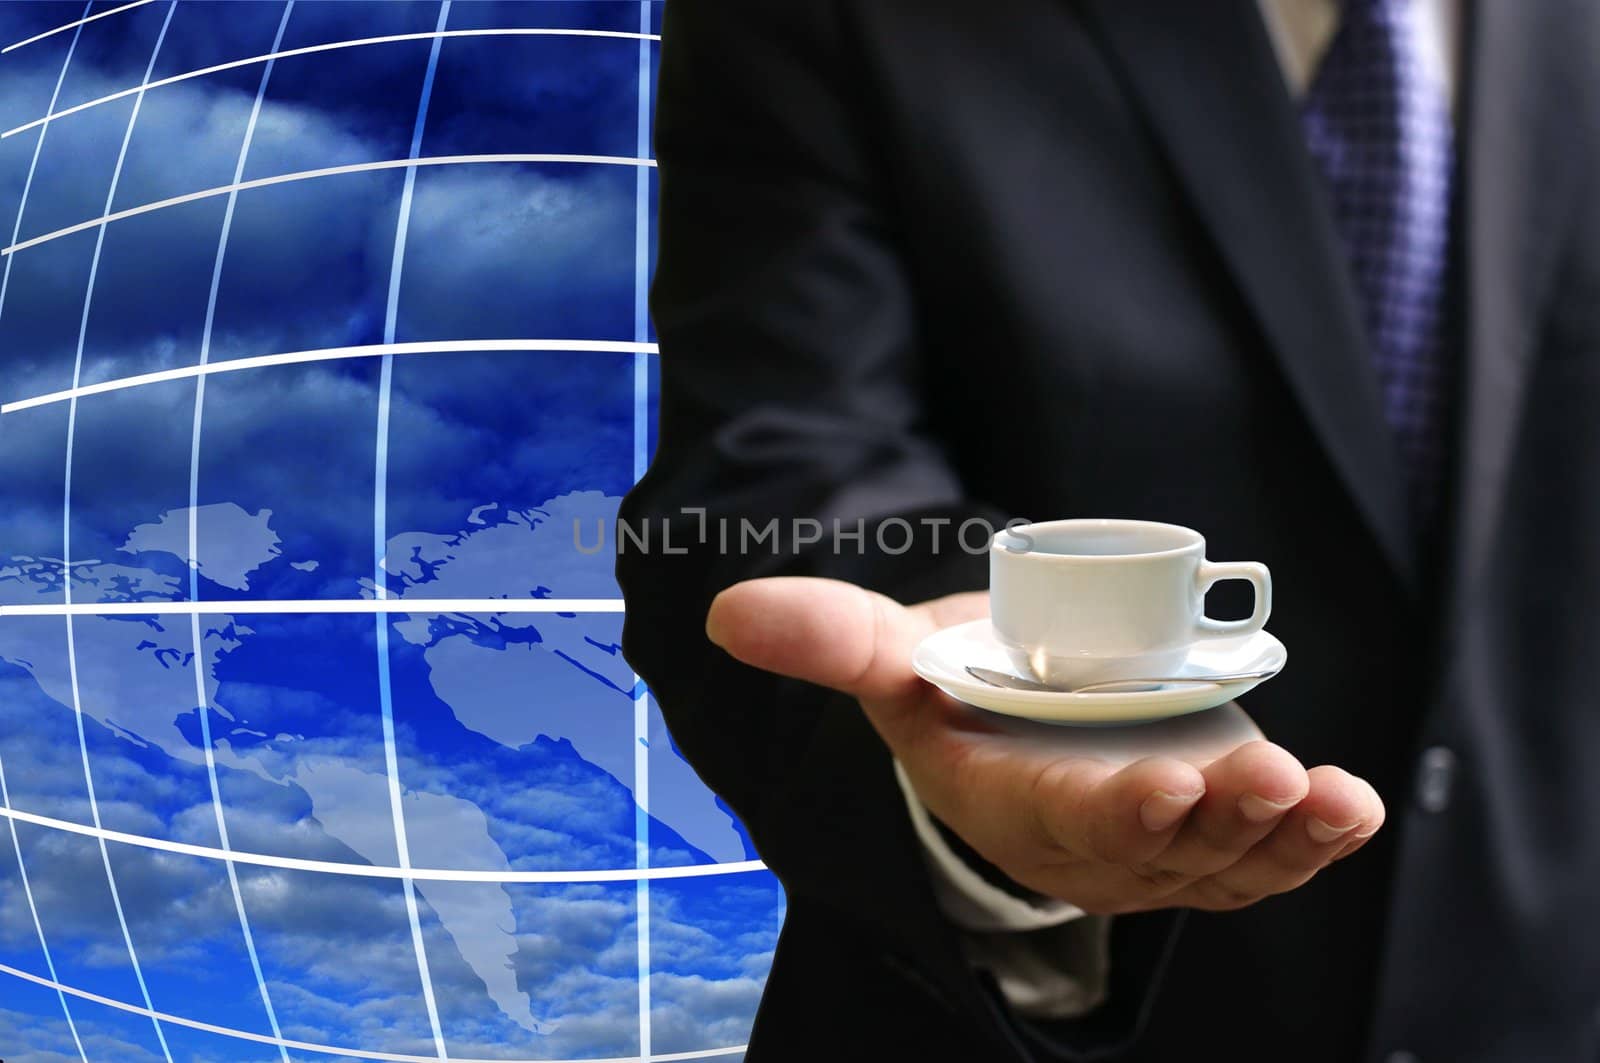 Coffee business around the world, Global coffee business concept by pixbox77